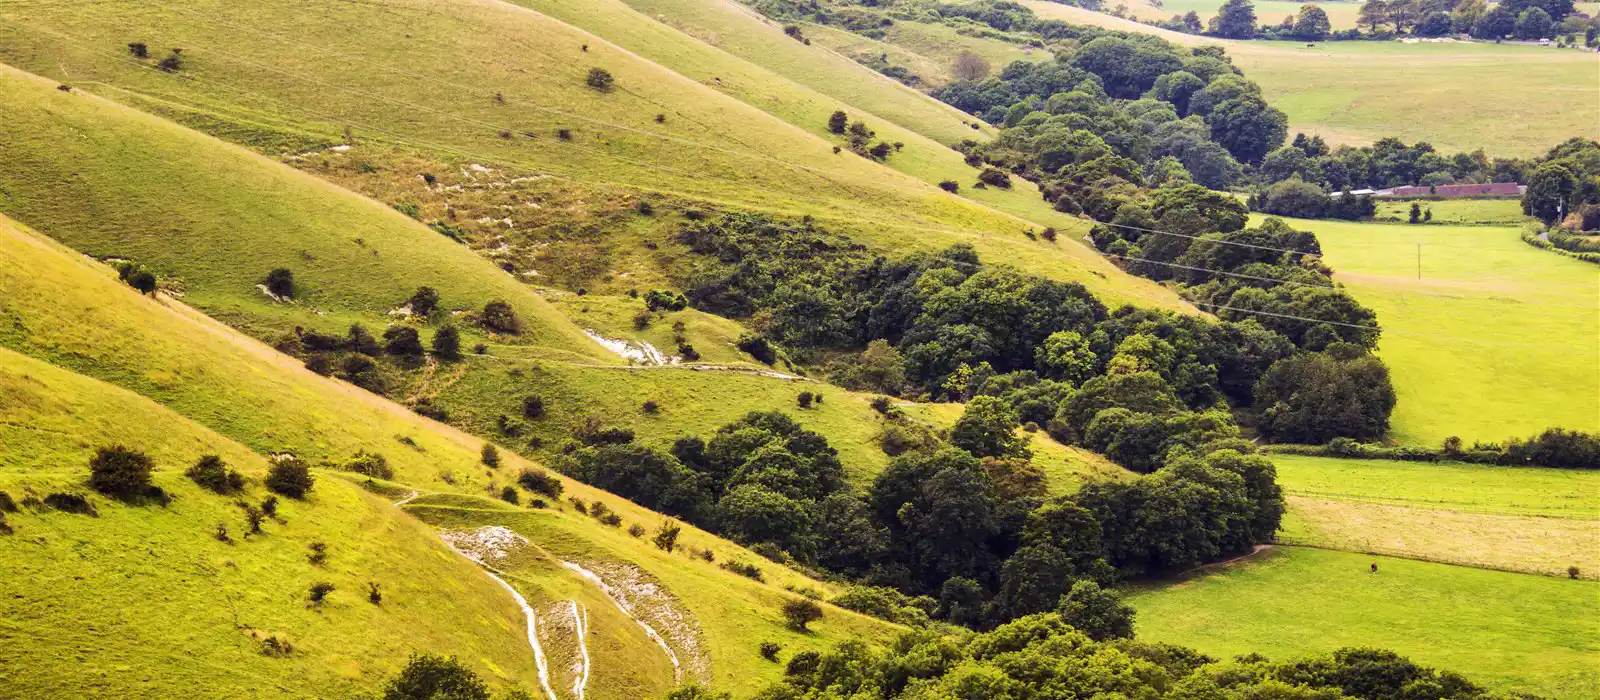 South Downs National Park in West Sussex